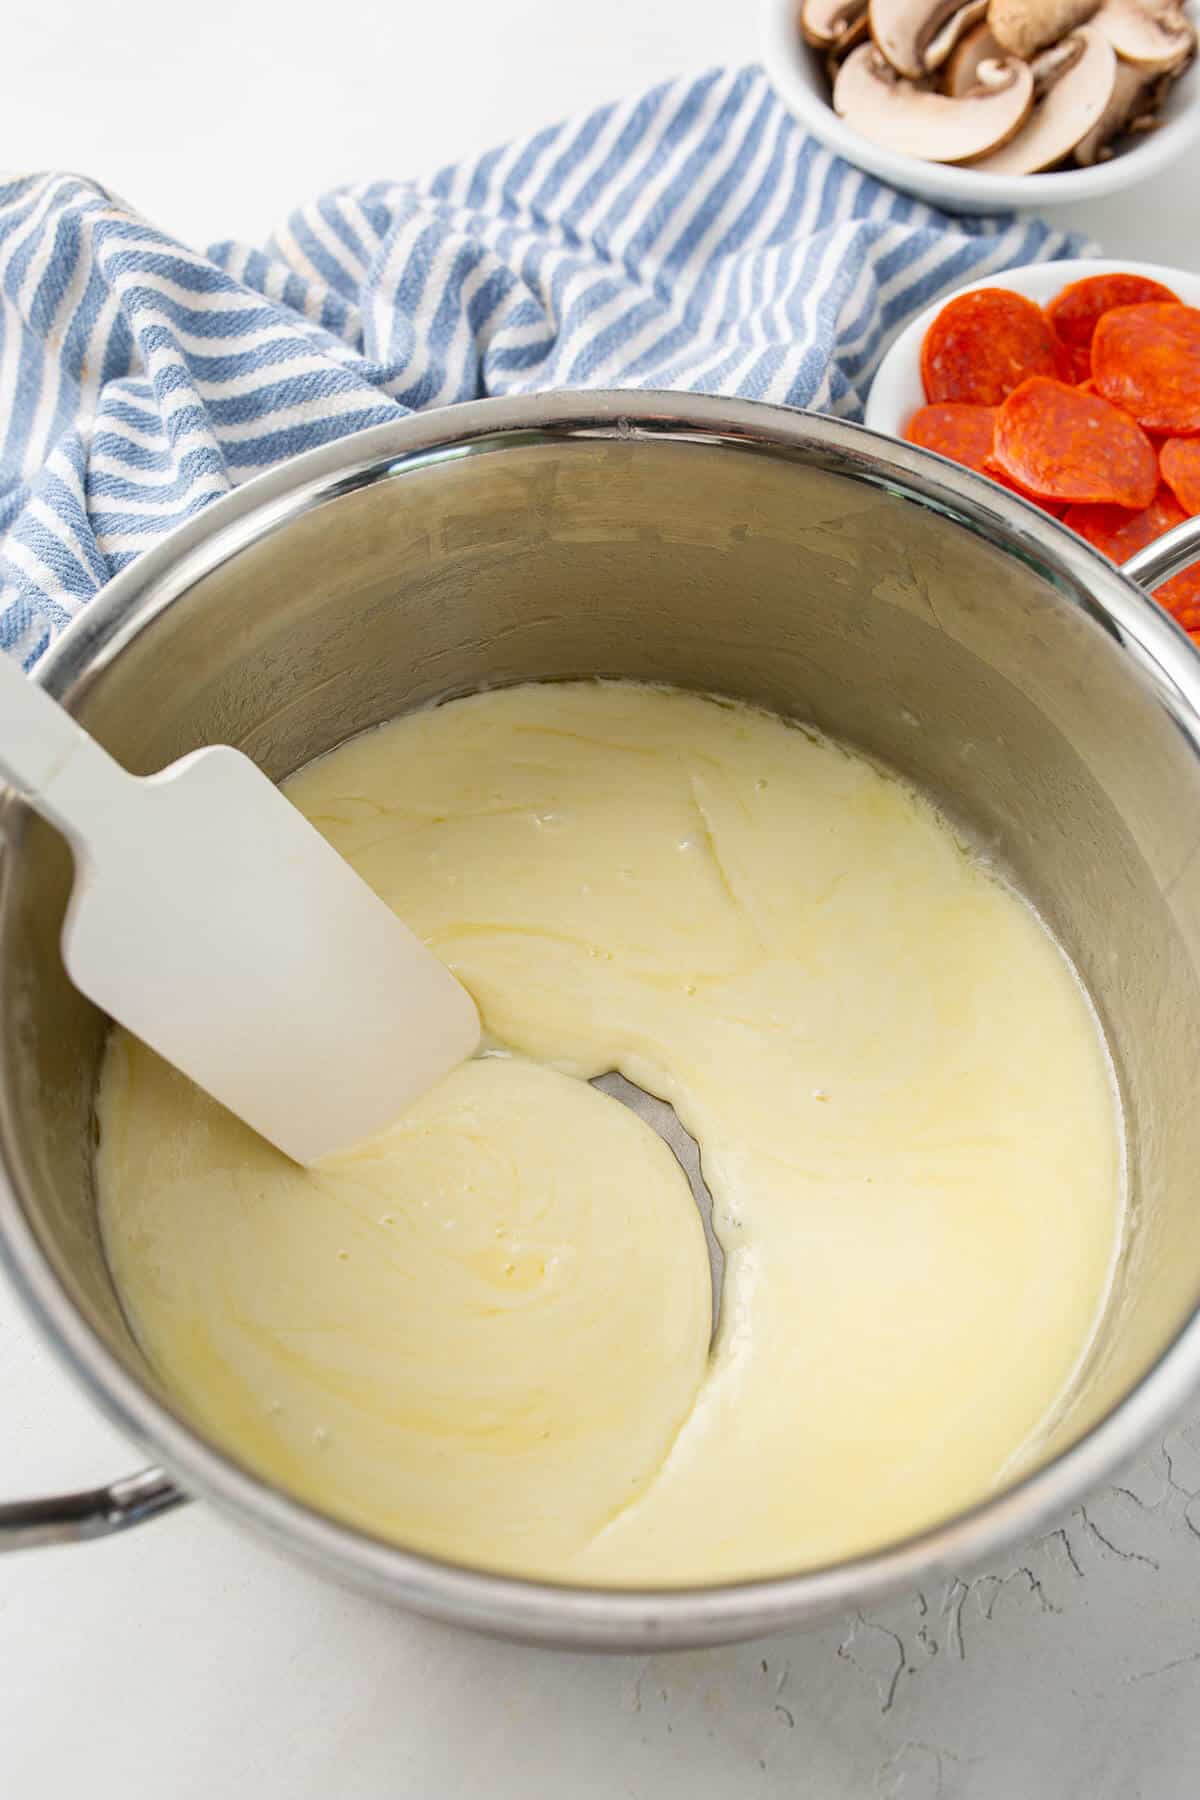 Melting butter and mozzarella cheese in a metal bowl to make fathead dough